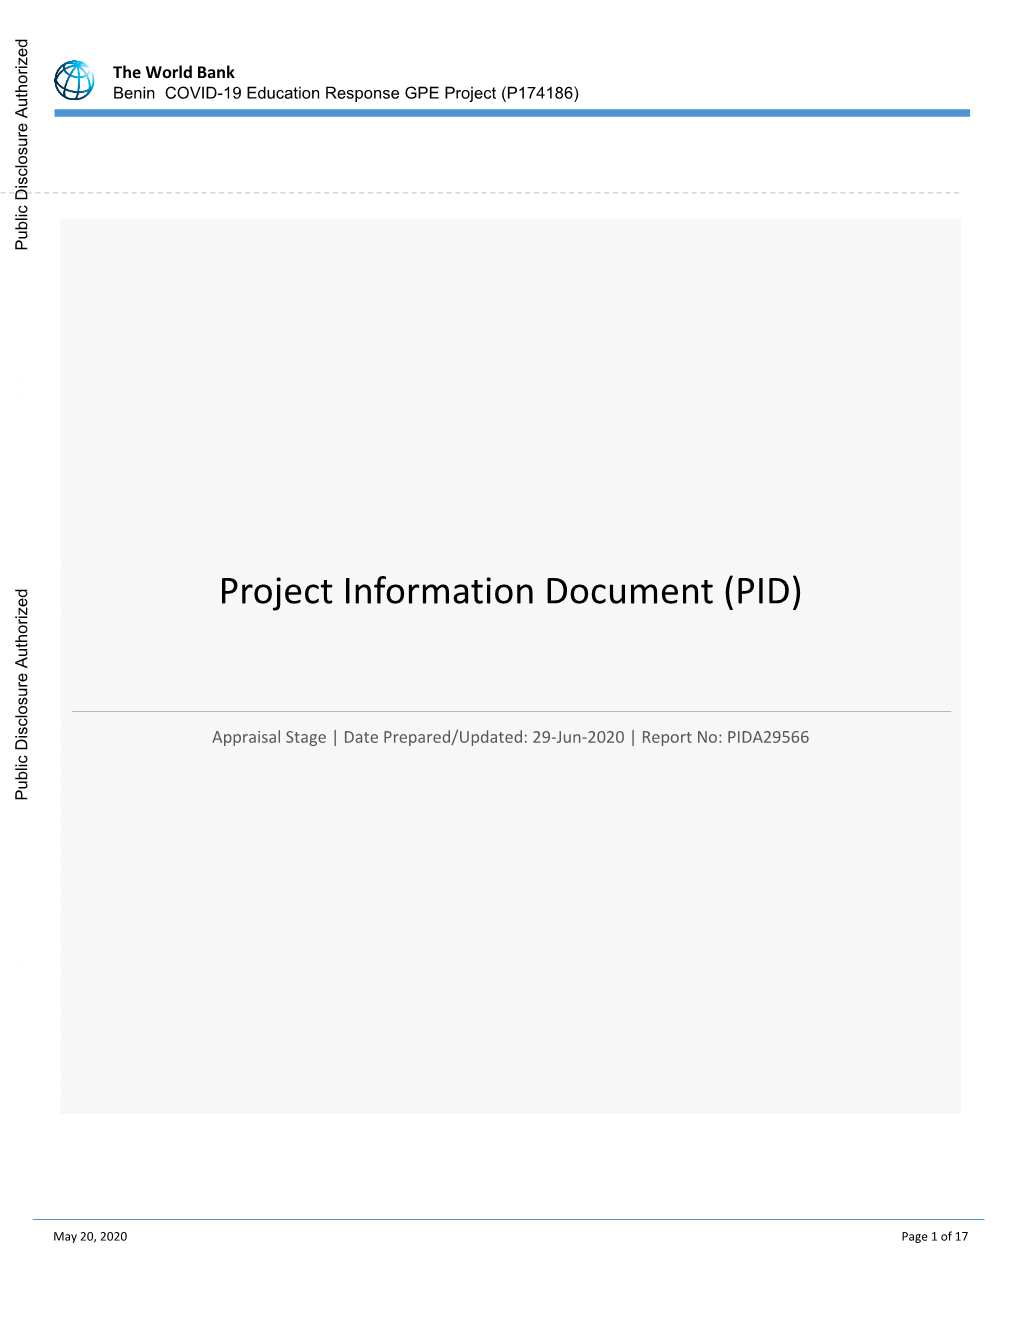 Project Information Document (PID)